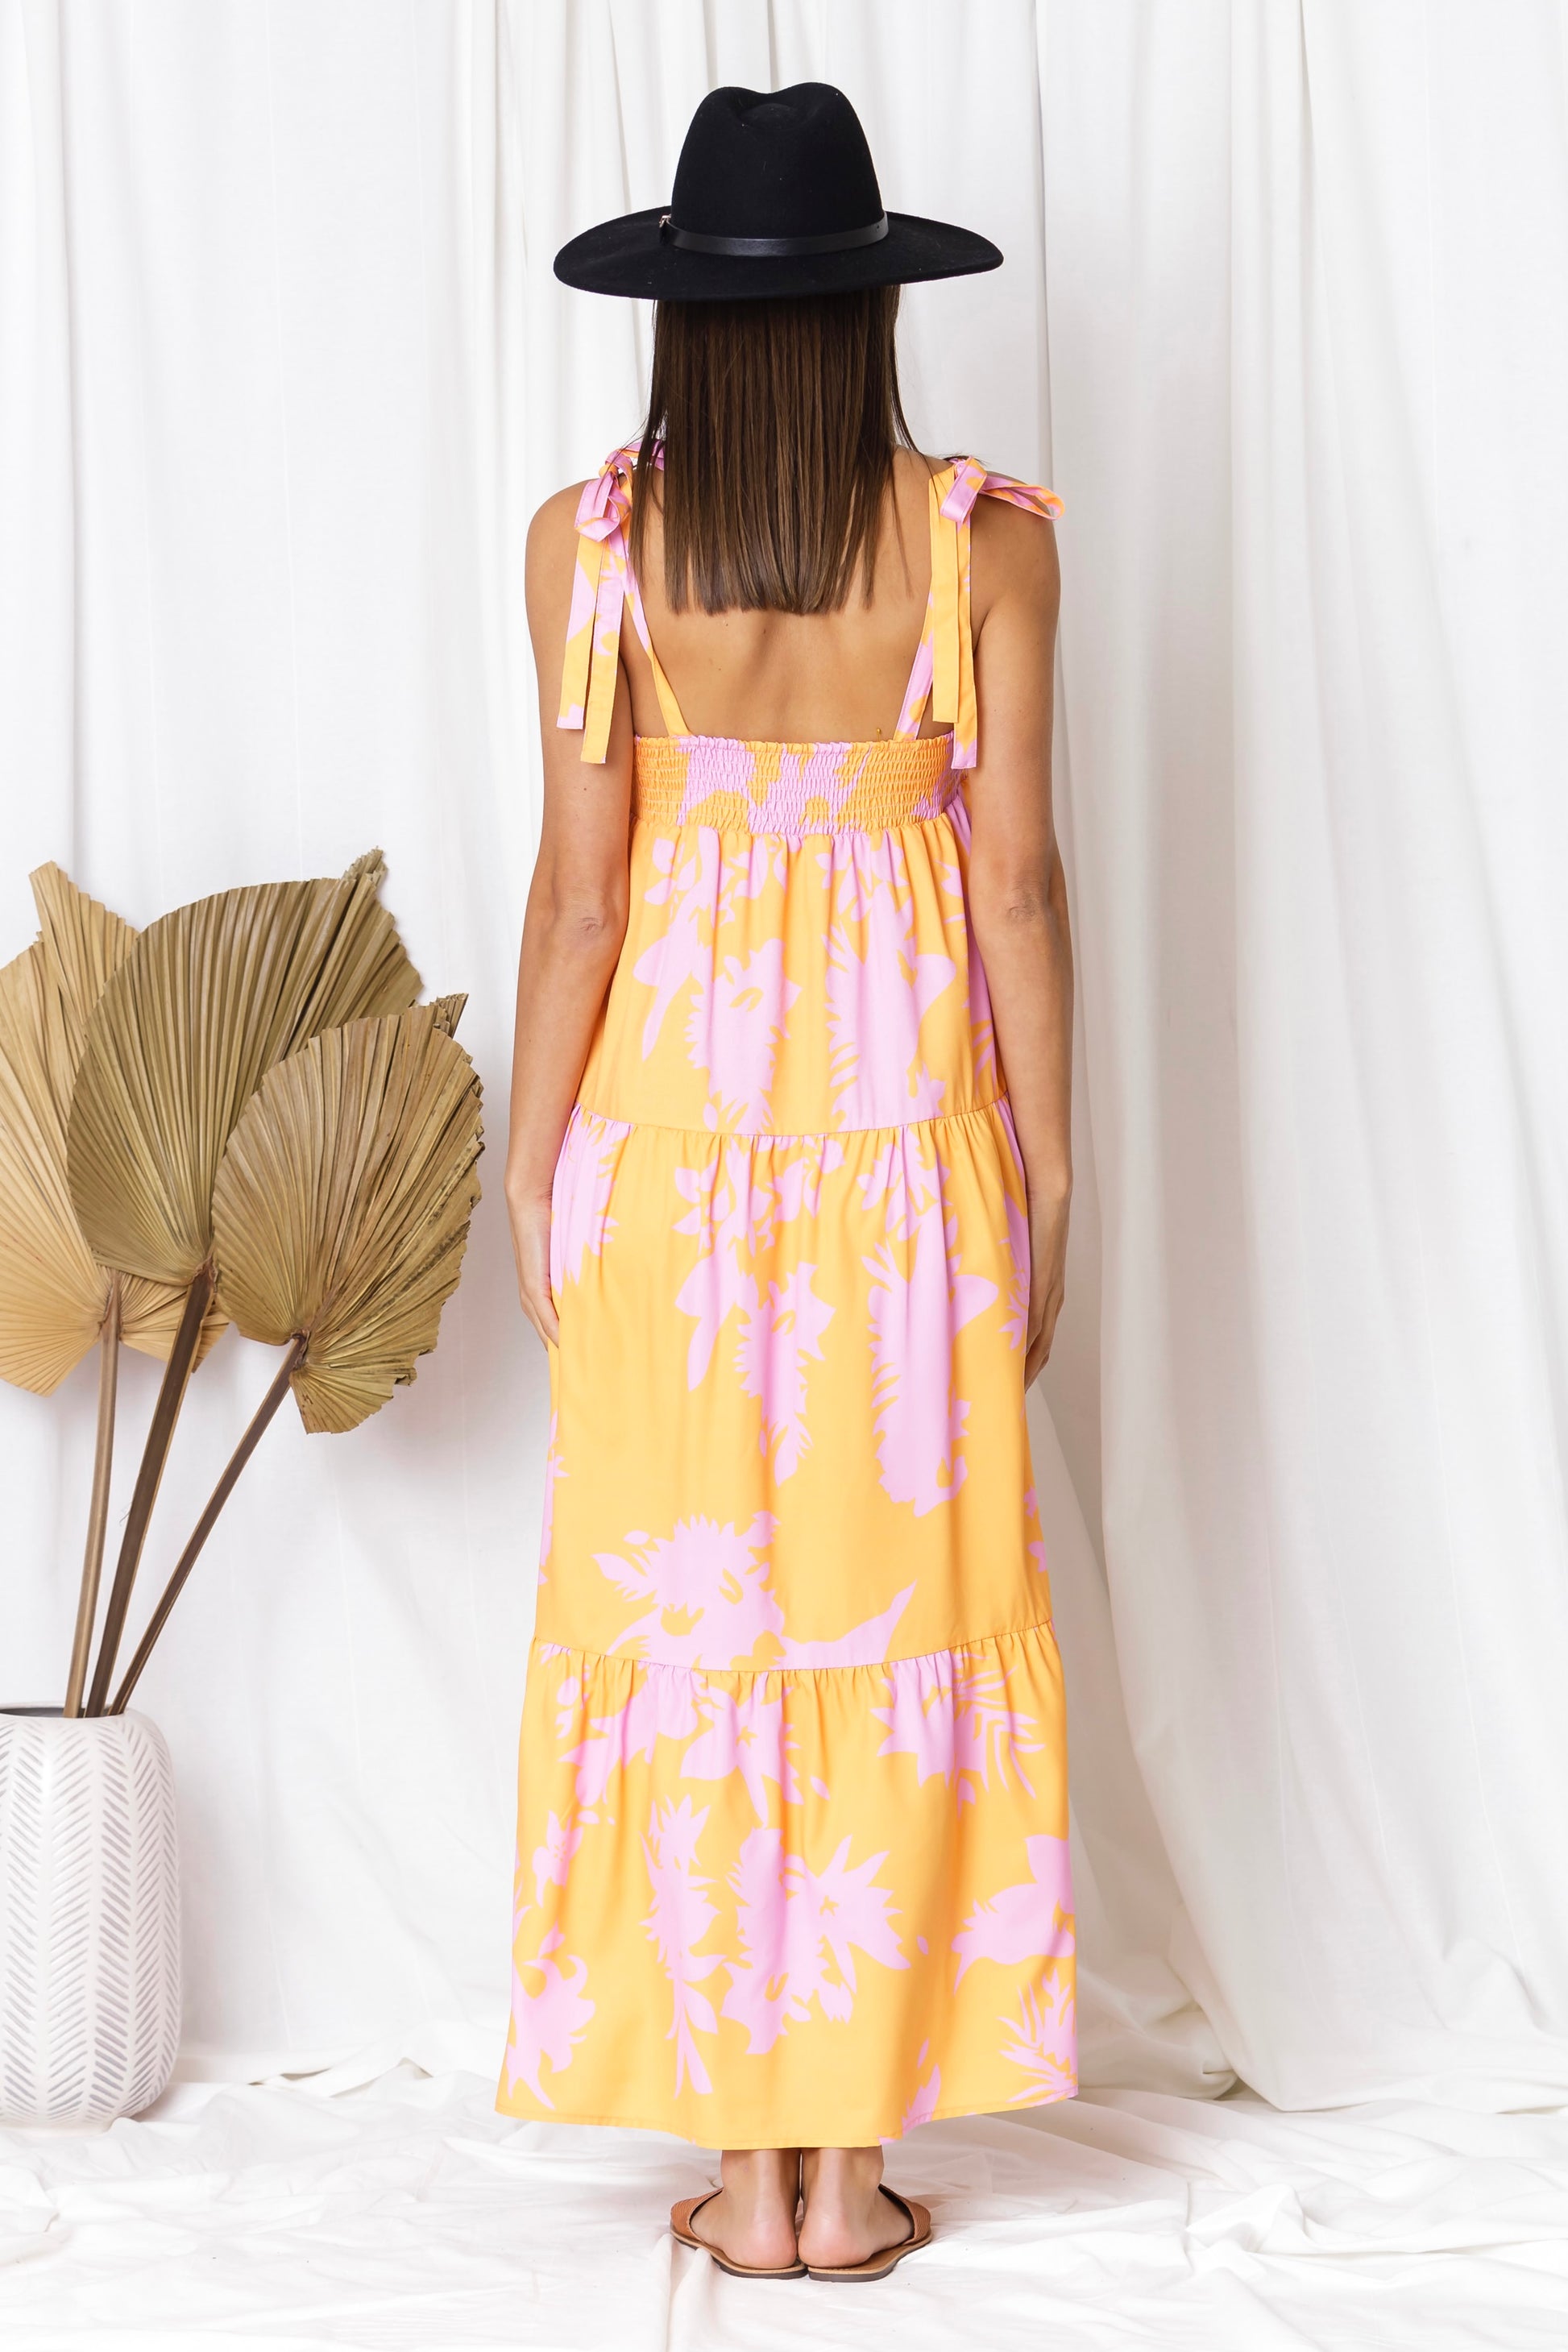 beach perfect dress with tie up shoulder straps, bright coloured pattern of orange and pink in a maxi length